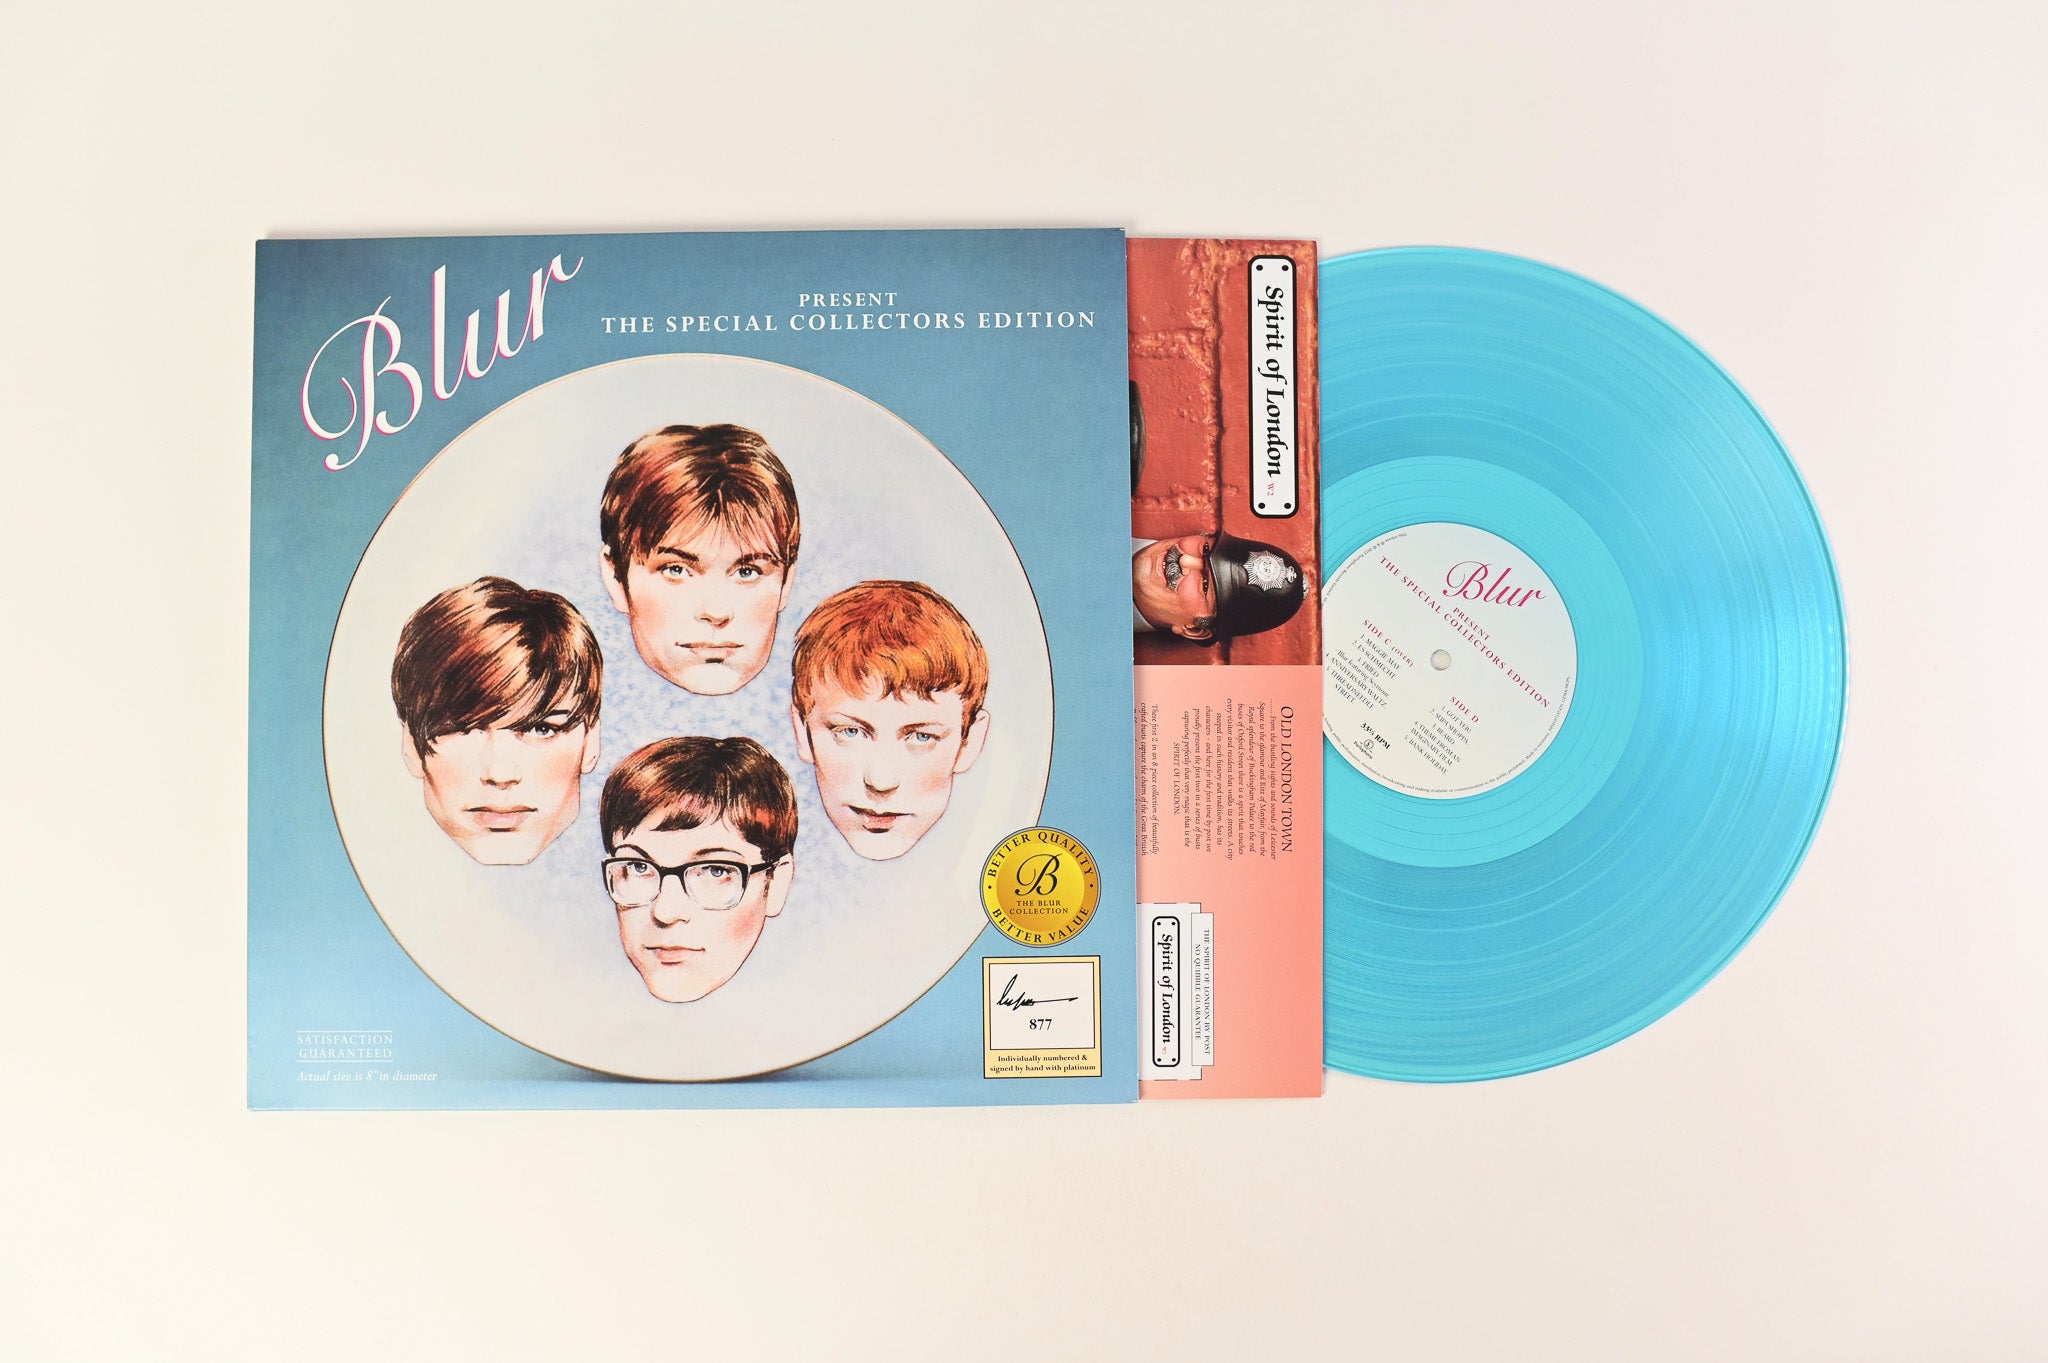 Blur - The Special Collectors Edition on Parlophone RSD Blue Translucent Reissue